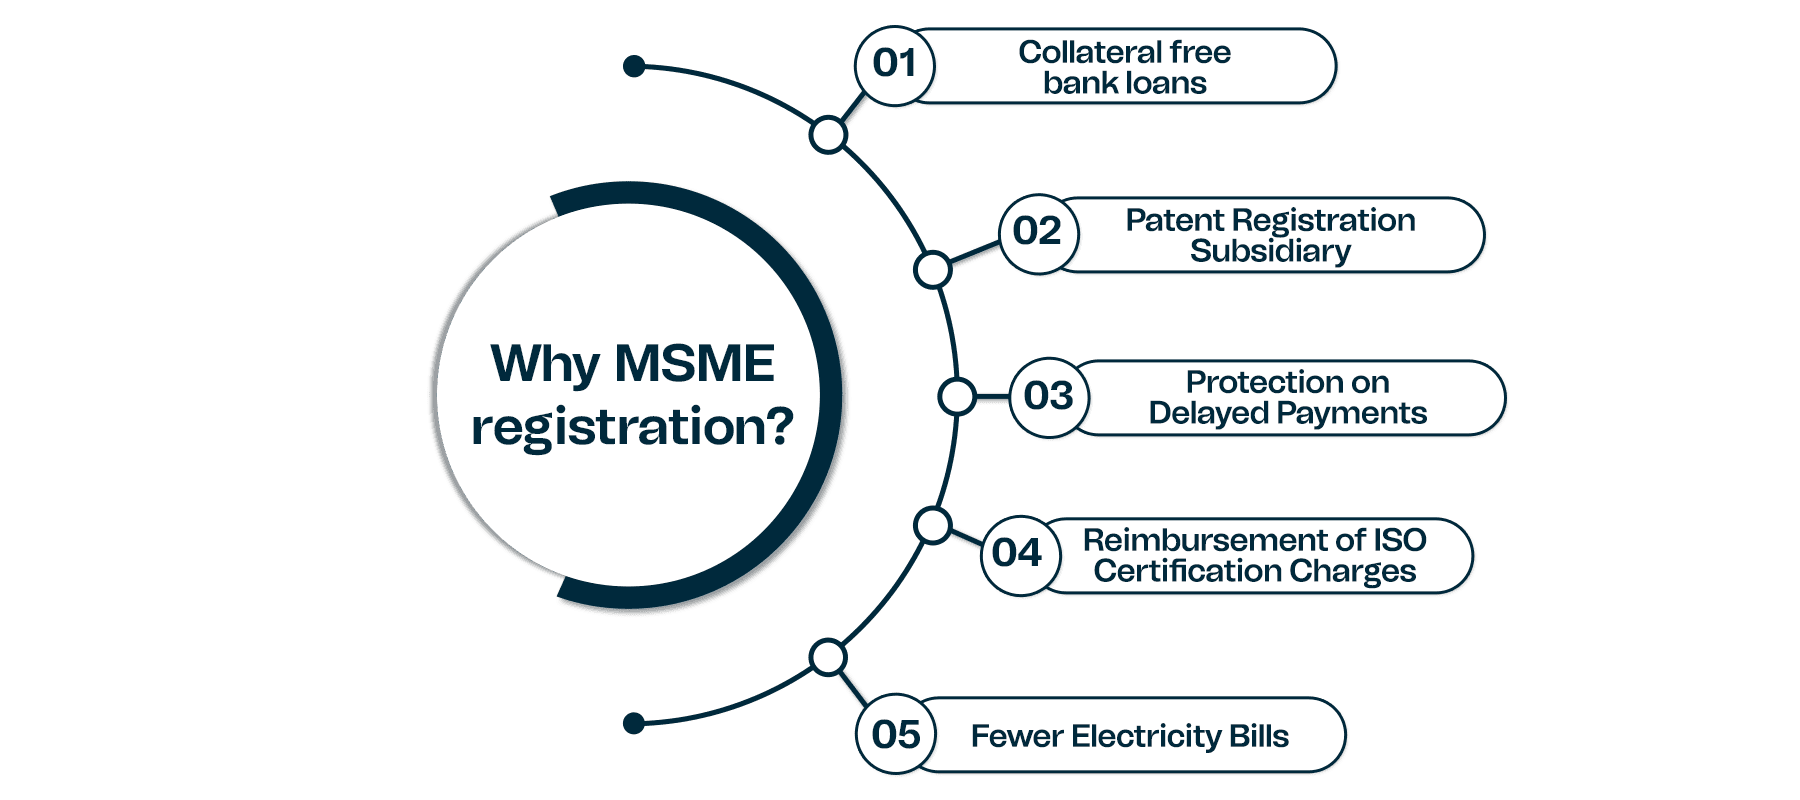  benefits of MSME registration under the provision of law 